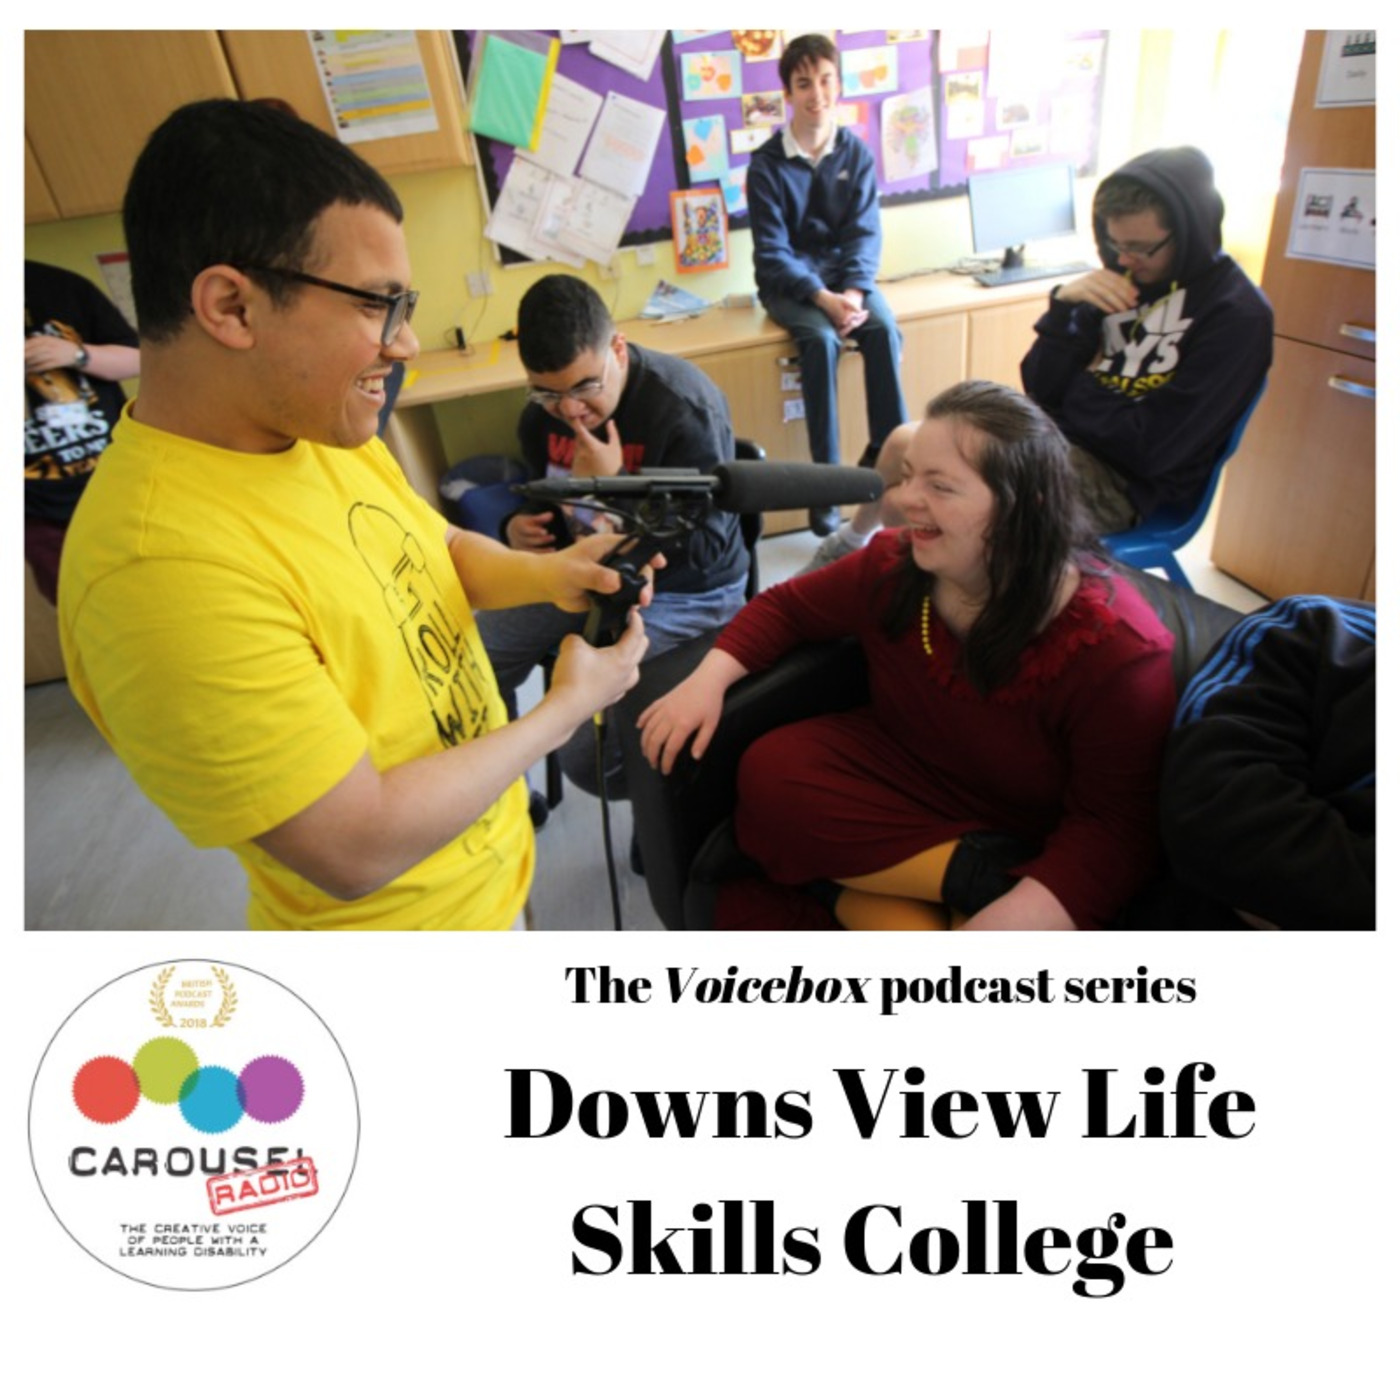 The Voicebox podcast: Downs View Life Skills College